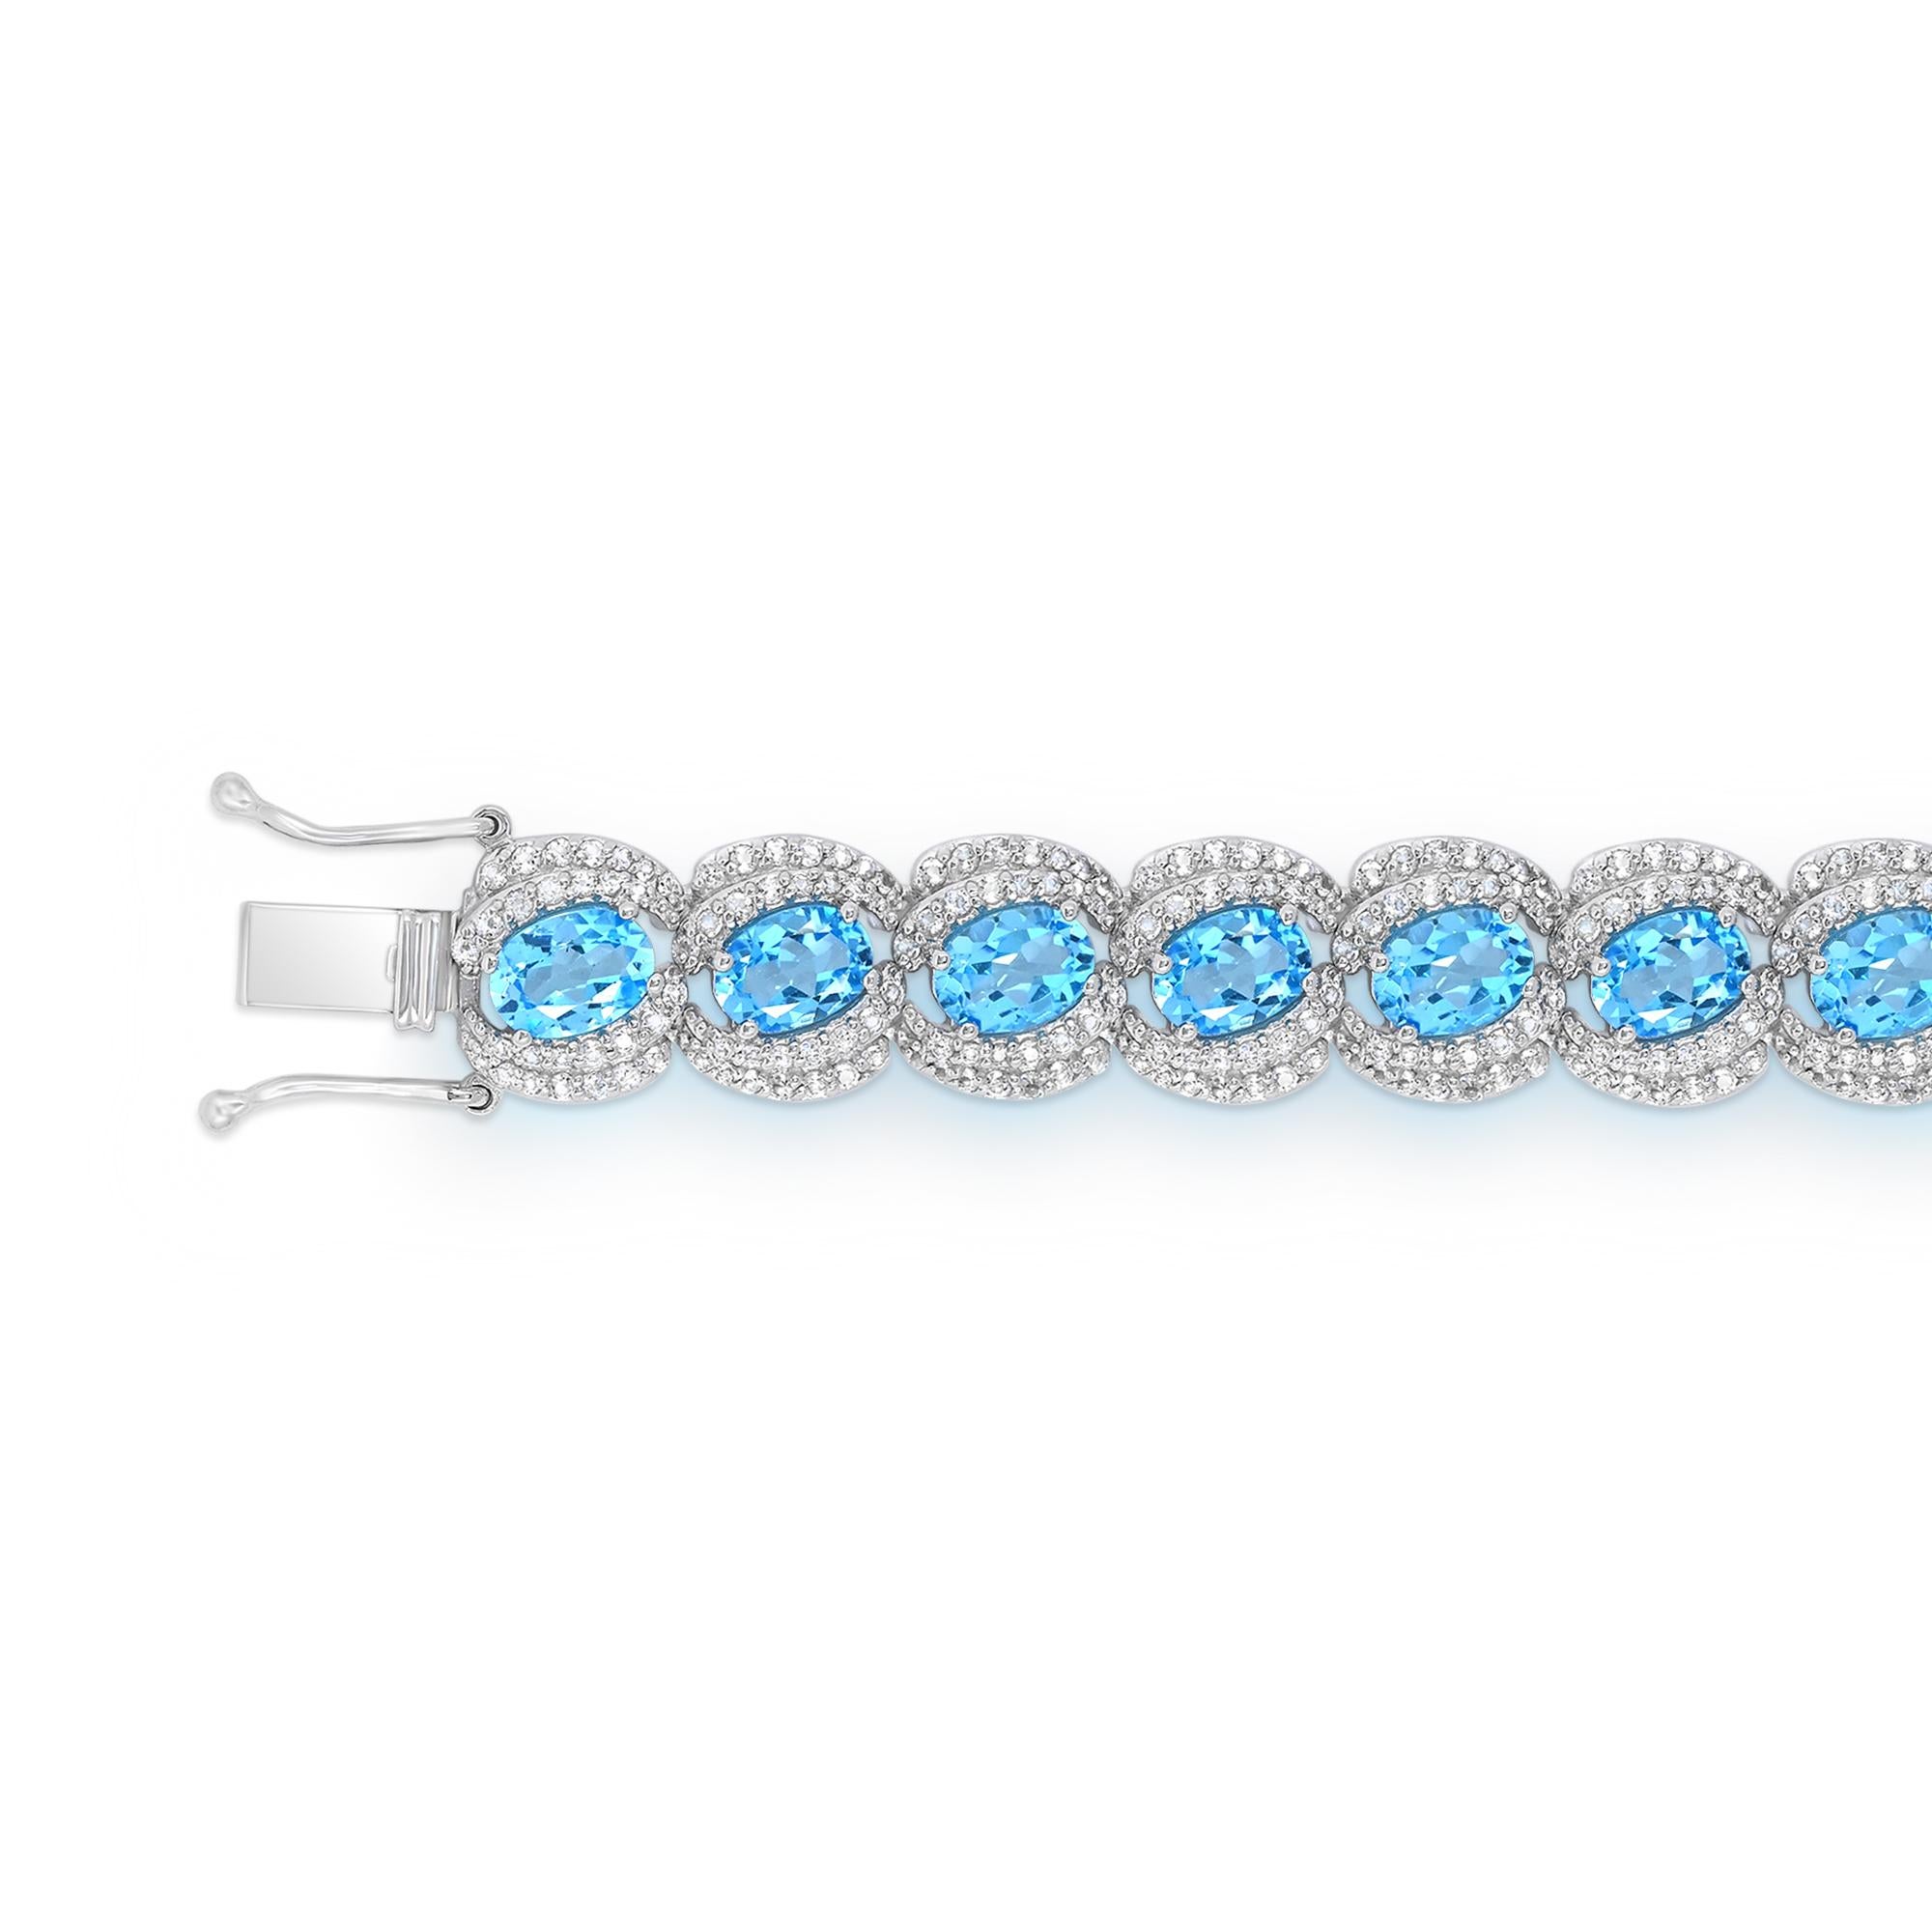 Contemporary 27-1/3 Carat Oval Swiss Blue Topaz and White Topaz Bracelet in Sterling Silver For Sale